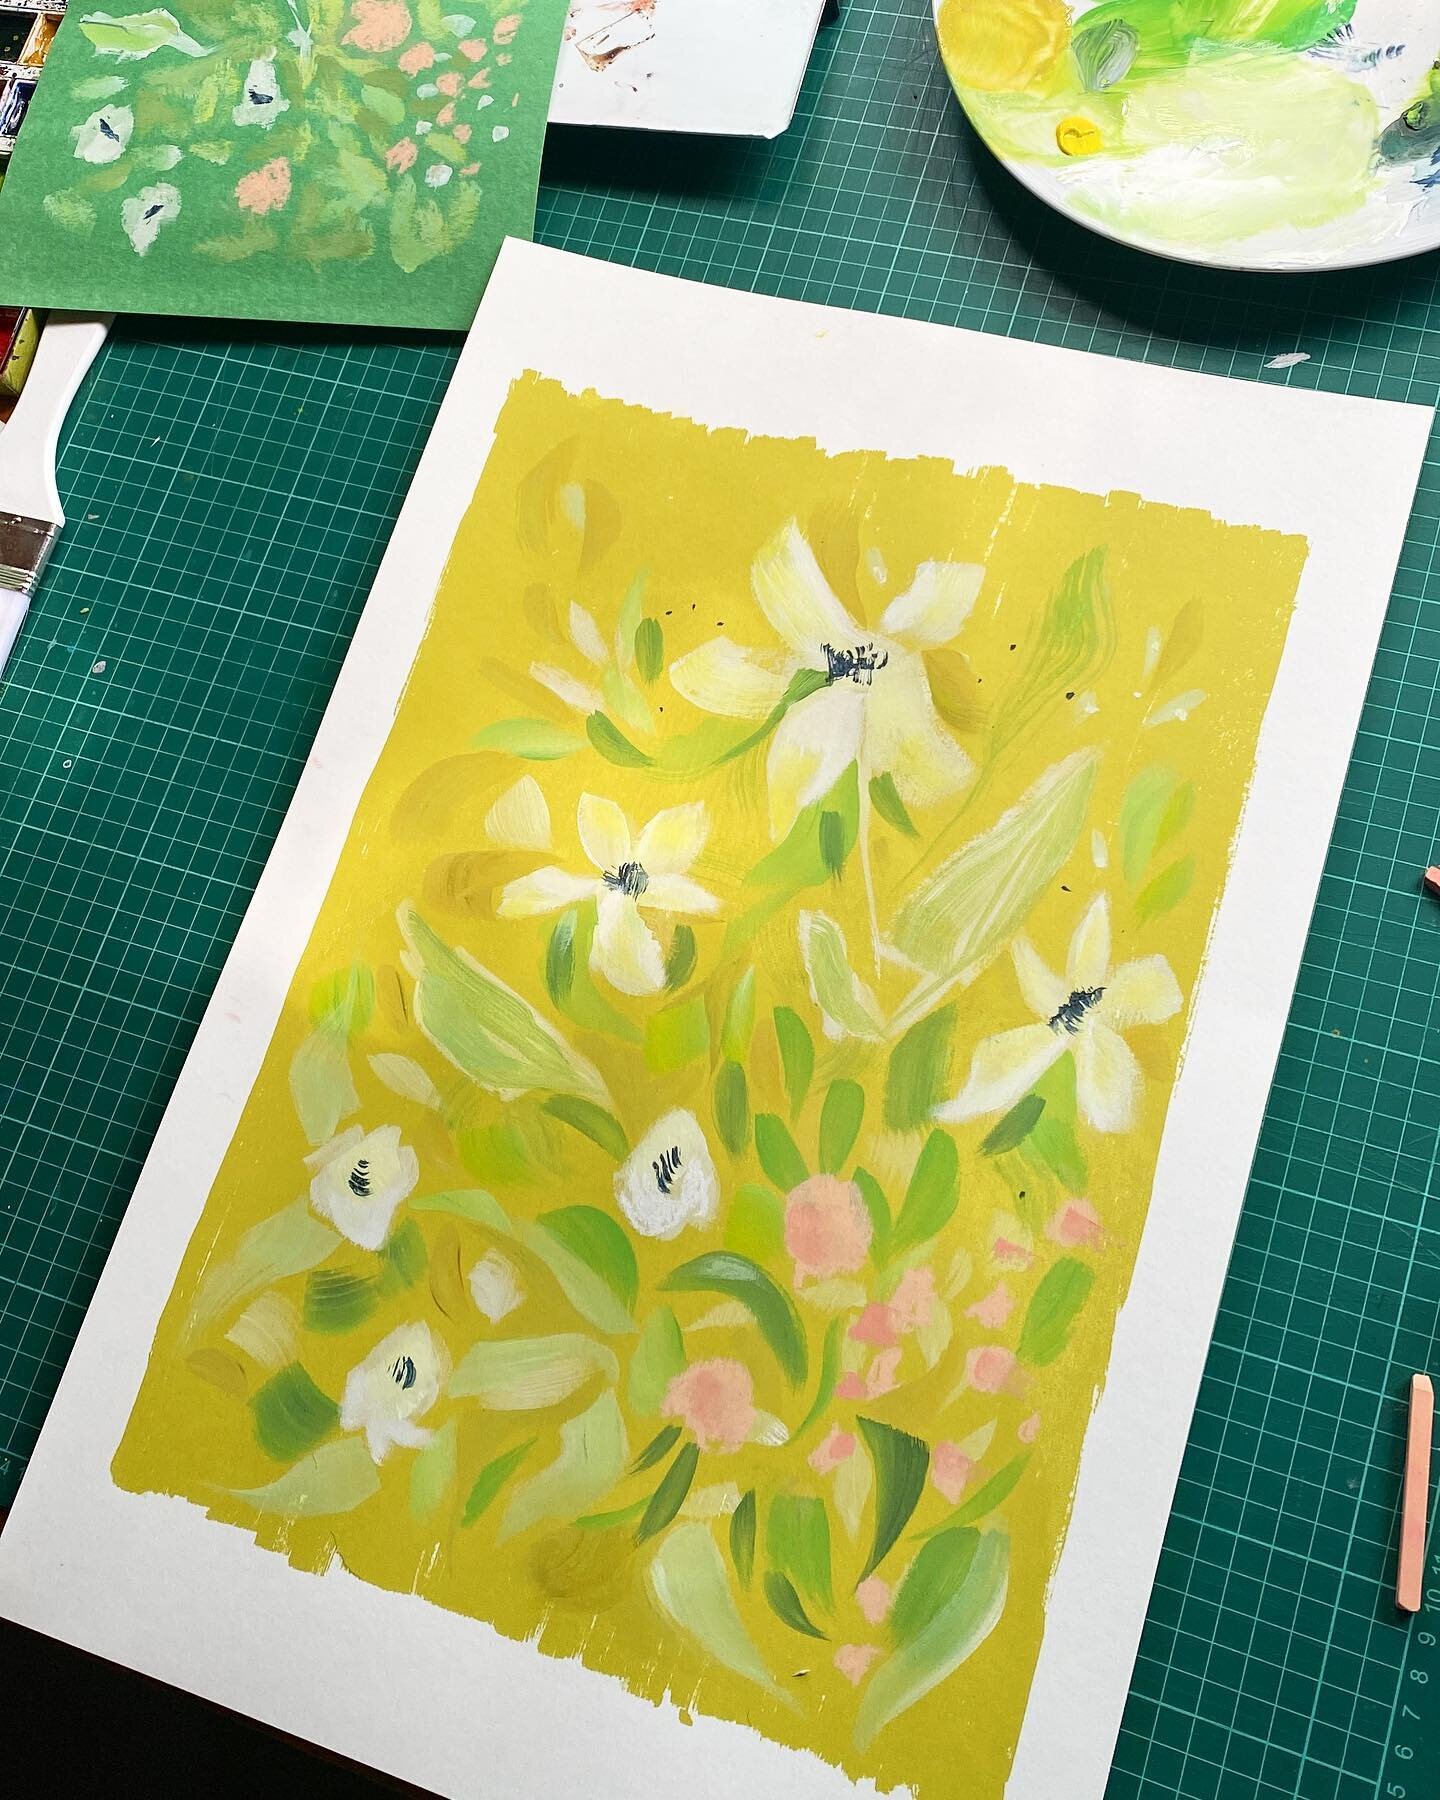 ☀️ A wonderful warm sunny afternoon filled with painting gouache on my screen printed backgrounds (my current colour obsession: chartreuse-pistachio-avocado &hellip; what would you call it?) Will be ready to sell by the weekend @artistsopenhse @dulwi